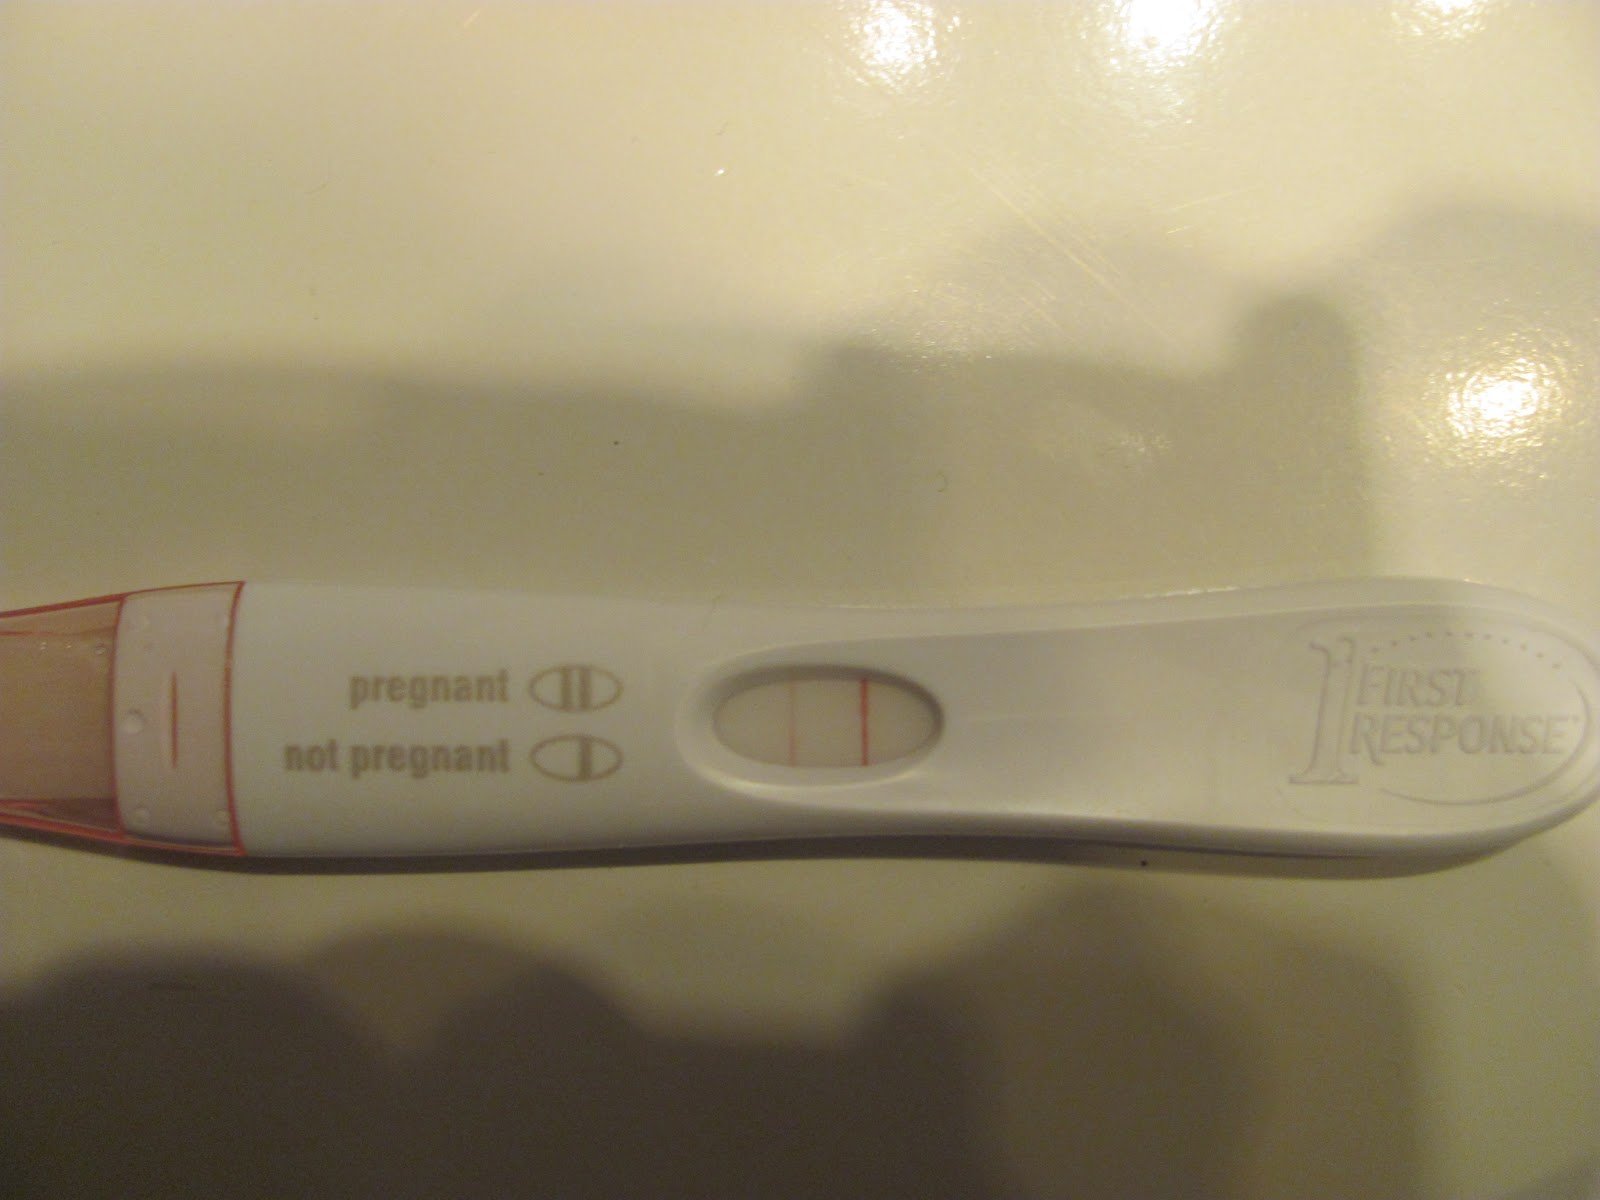 No Period After Stopping Birth Control Negative Pregnancy Test